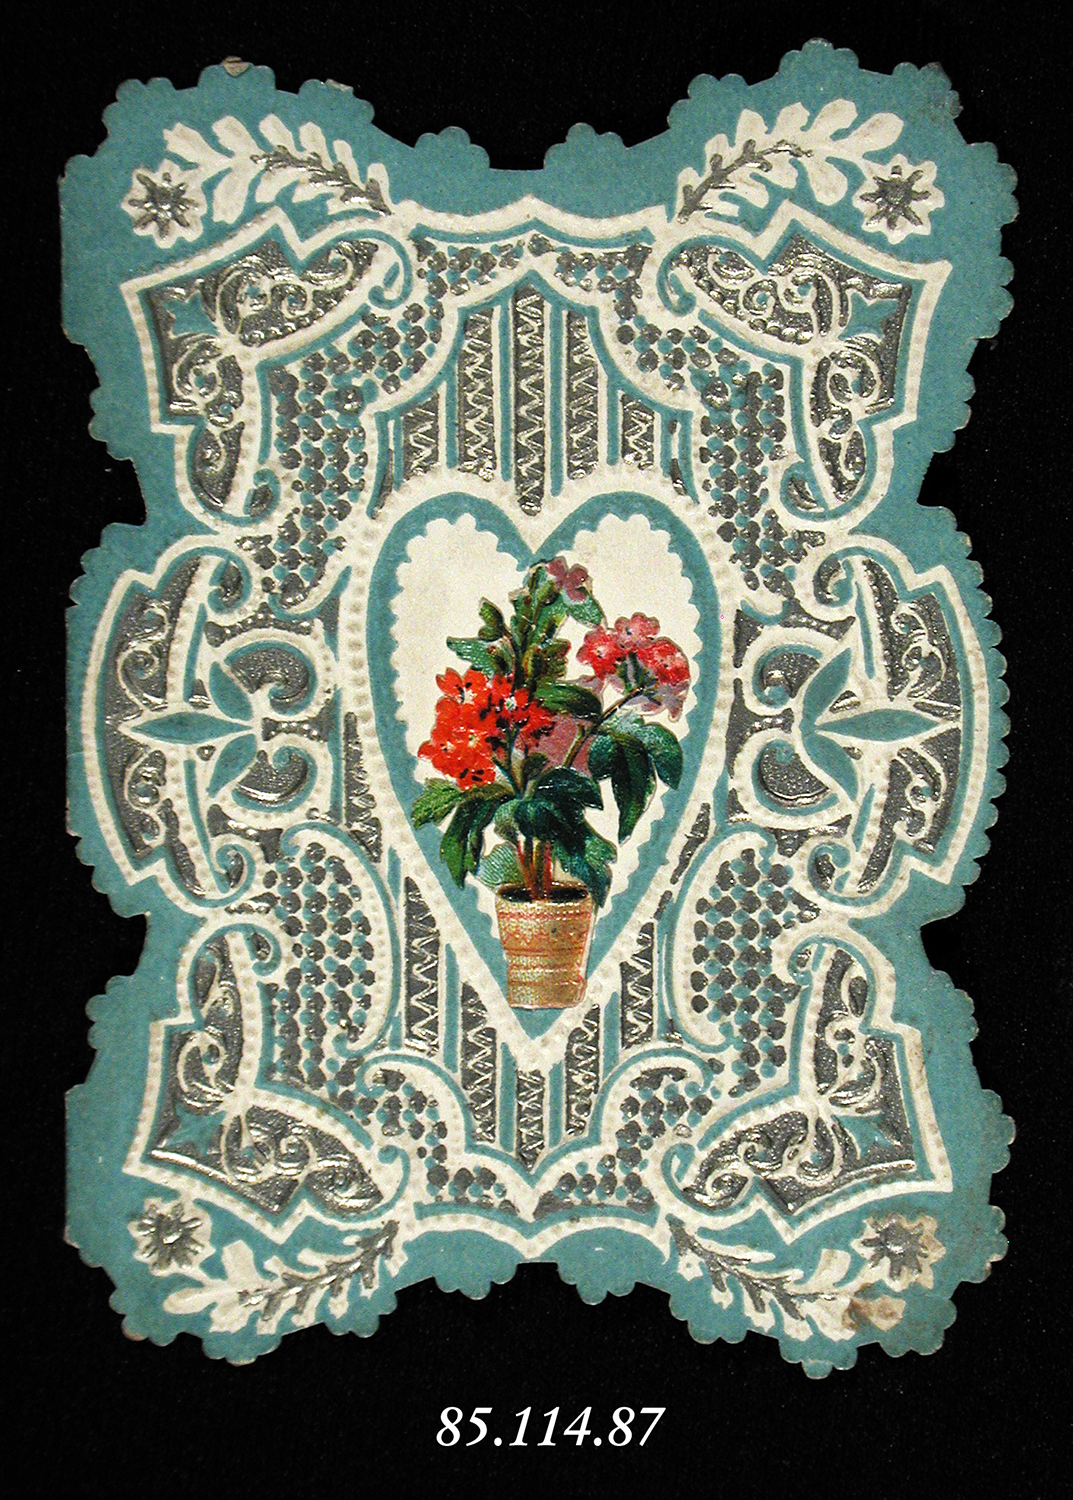 A Valentine's Day card decorated with flowers.